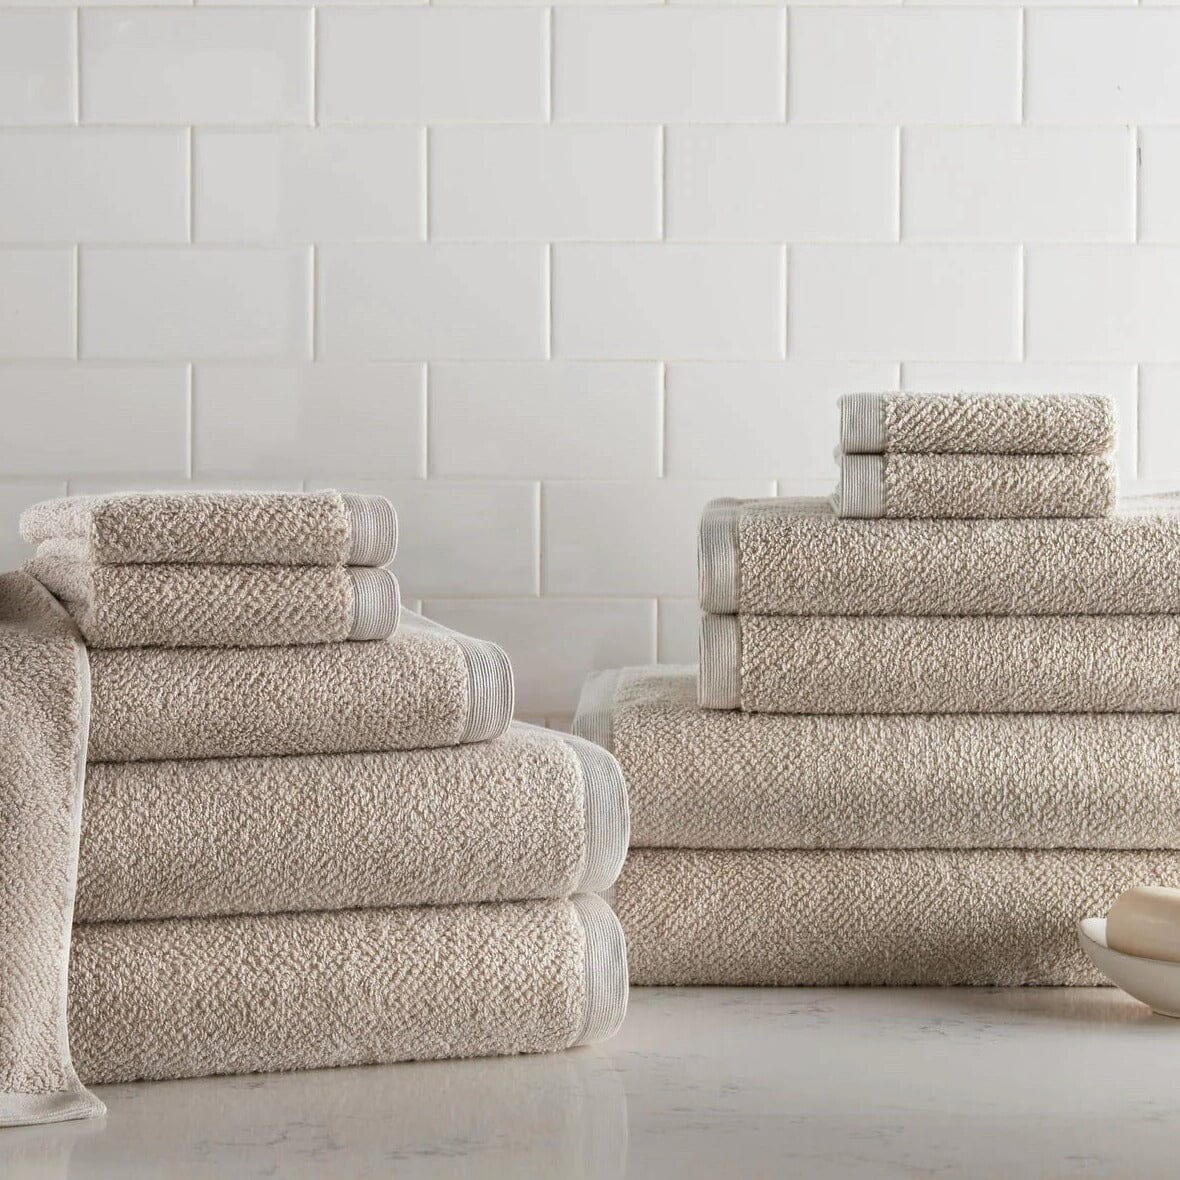 https://cdn.shopify.com/s/files/1/1268/4551/products/Peacock-Alley-Towels_Jubilee-Terry-Linen-Figlinensandhome_1600x.jpg?v=1691894509